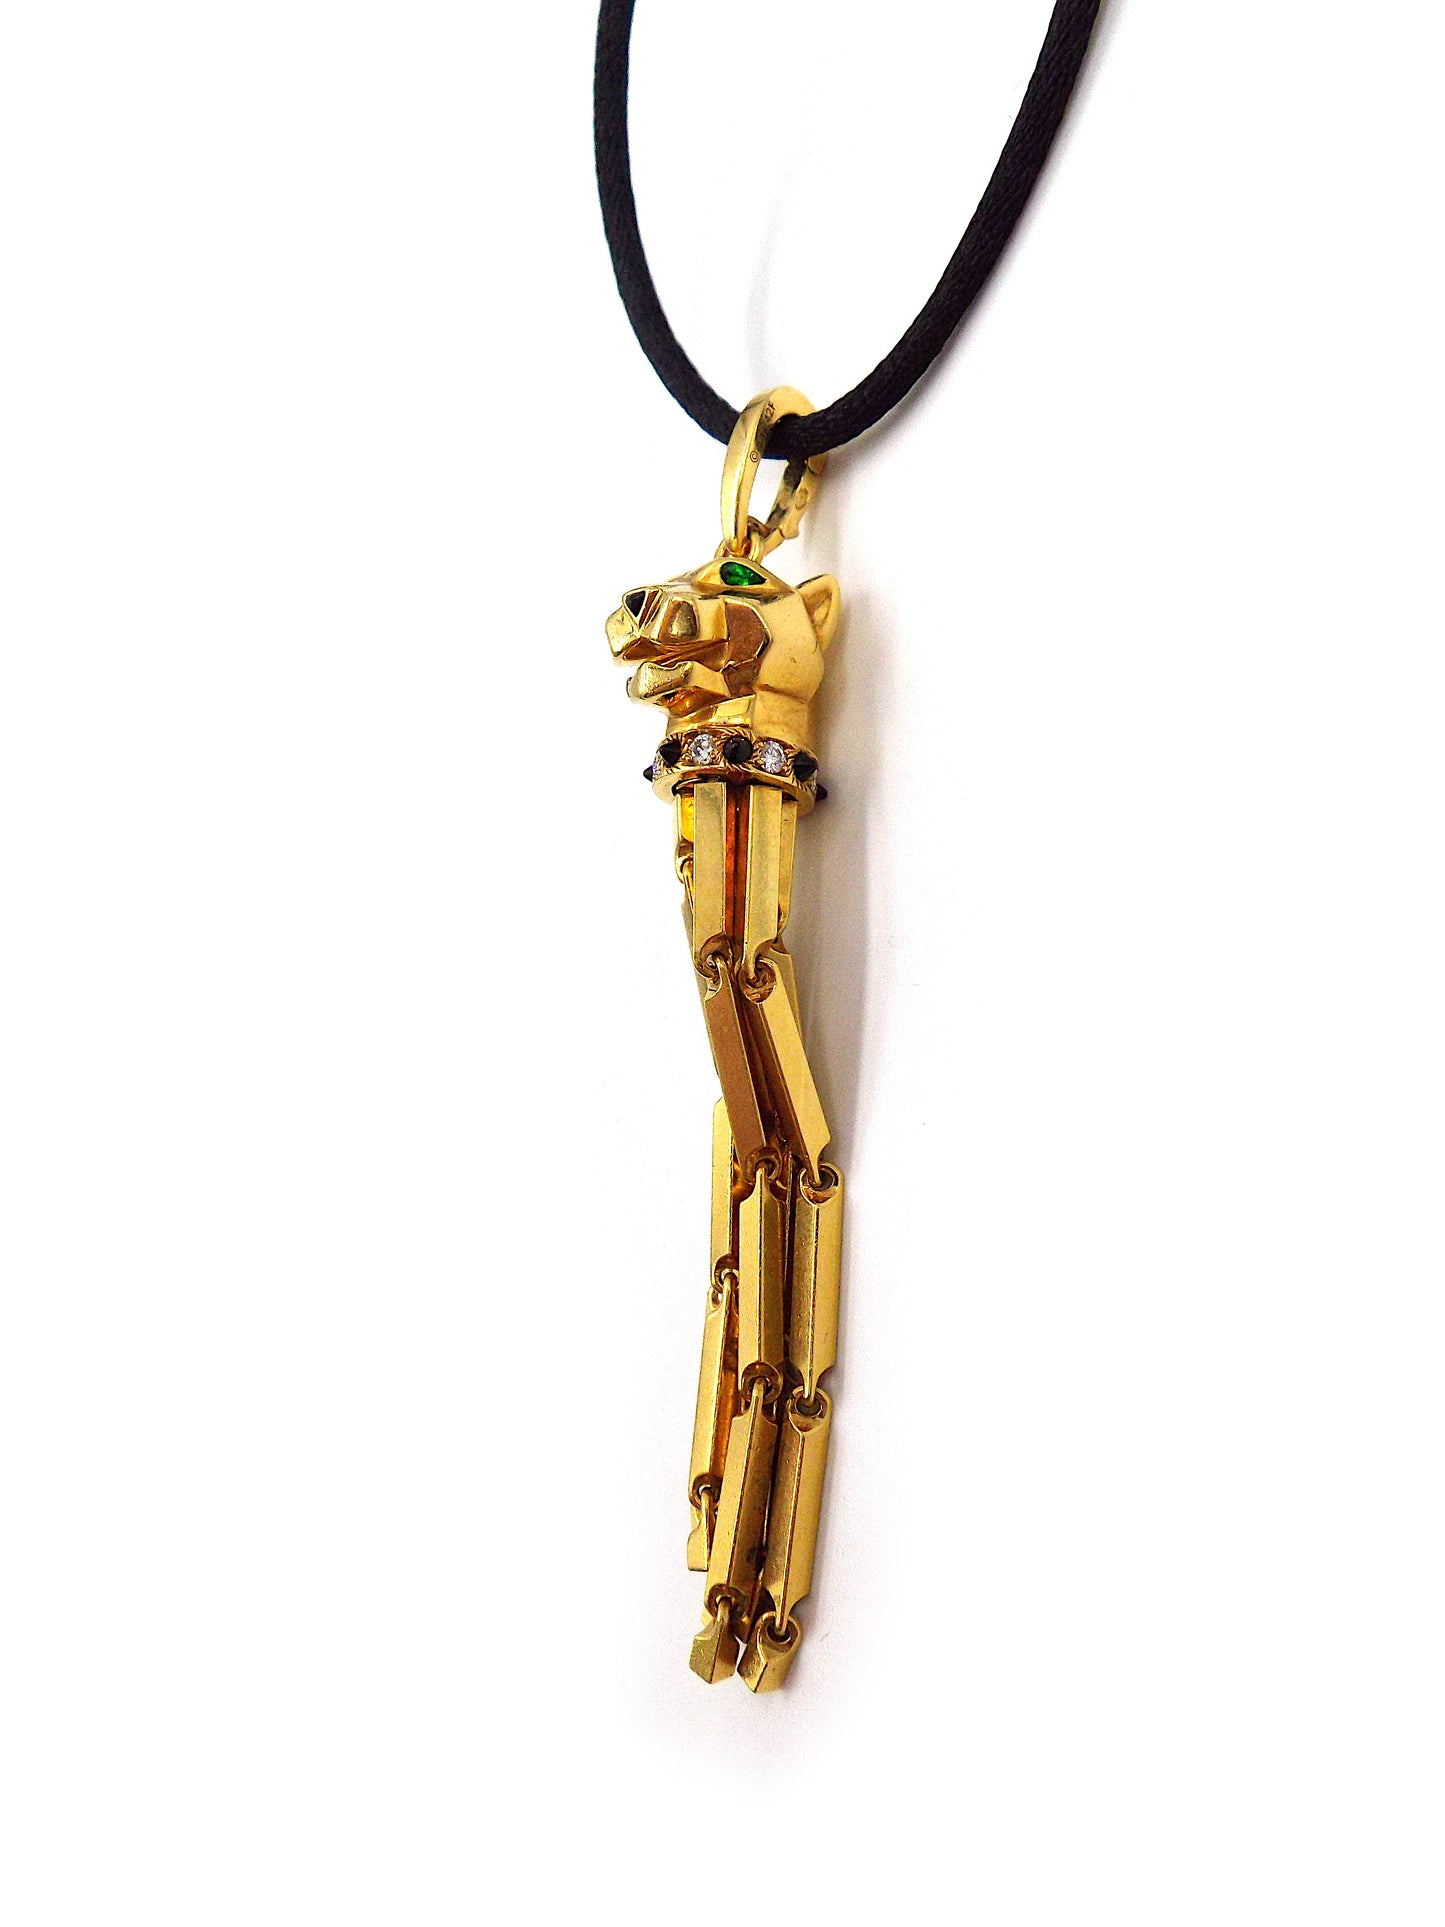 Cartier Panthere 18K Yellow Gold Pendant Necklace with a Black Cord